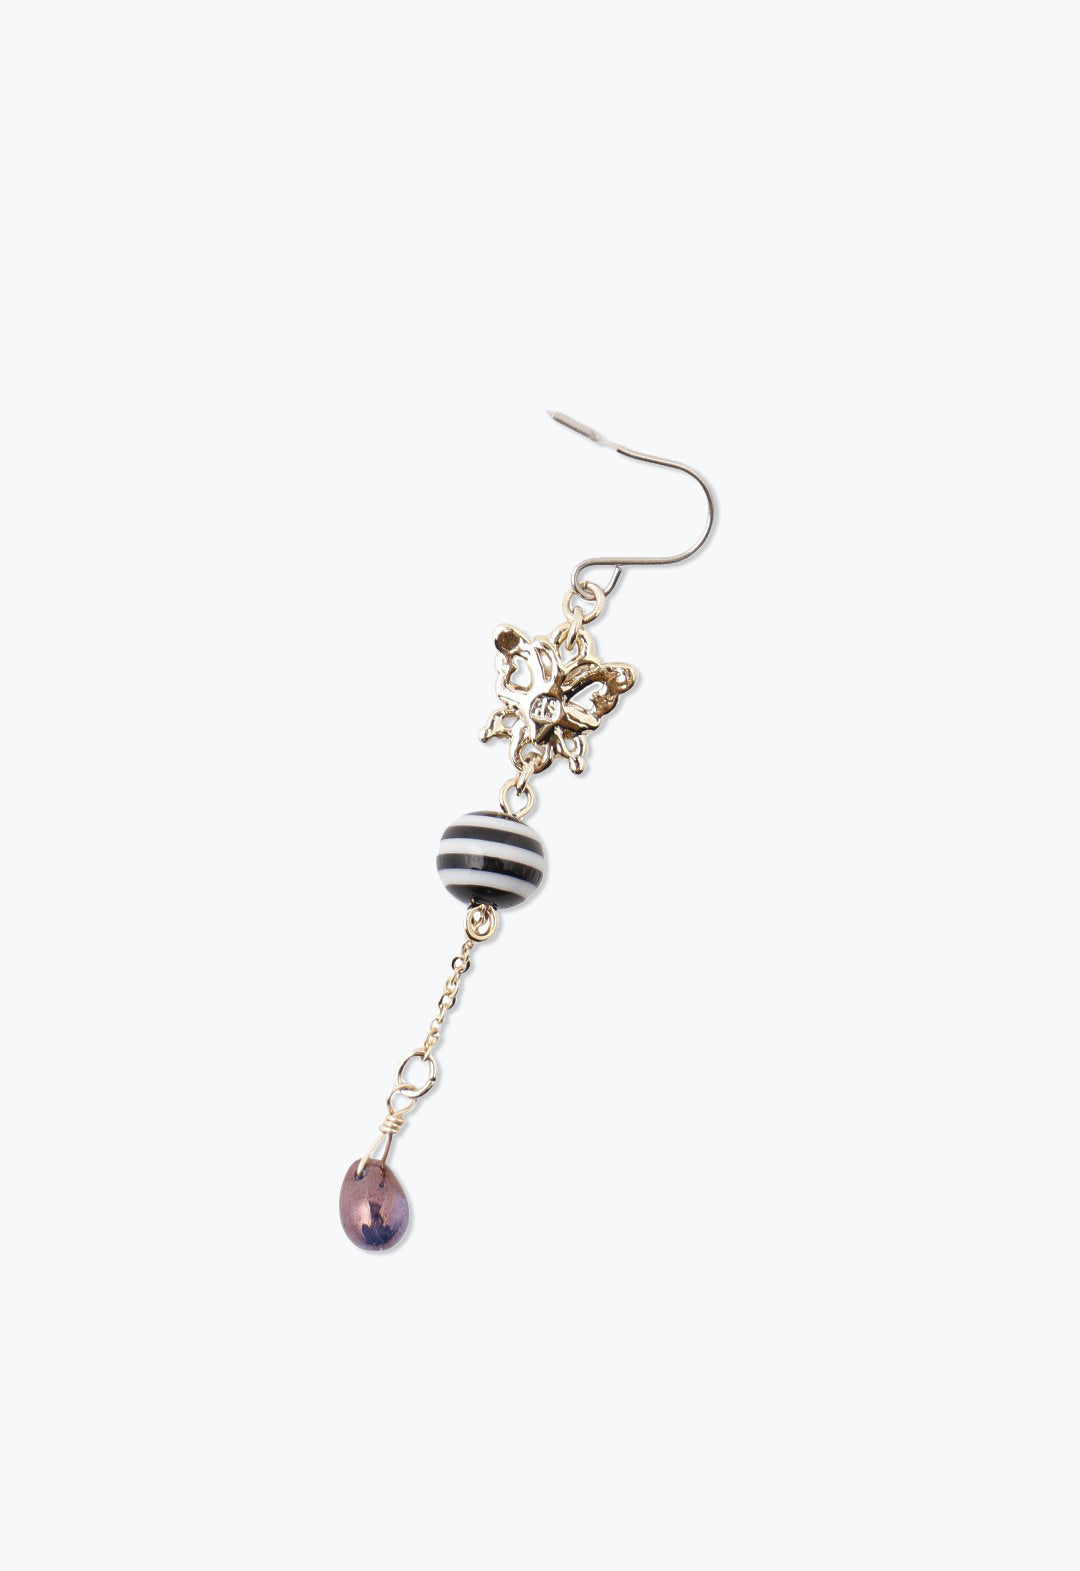 Earring golden butterfly an amethyst at center, b/w stiped ball under, purple Pearl end the chain